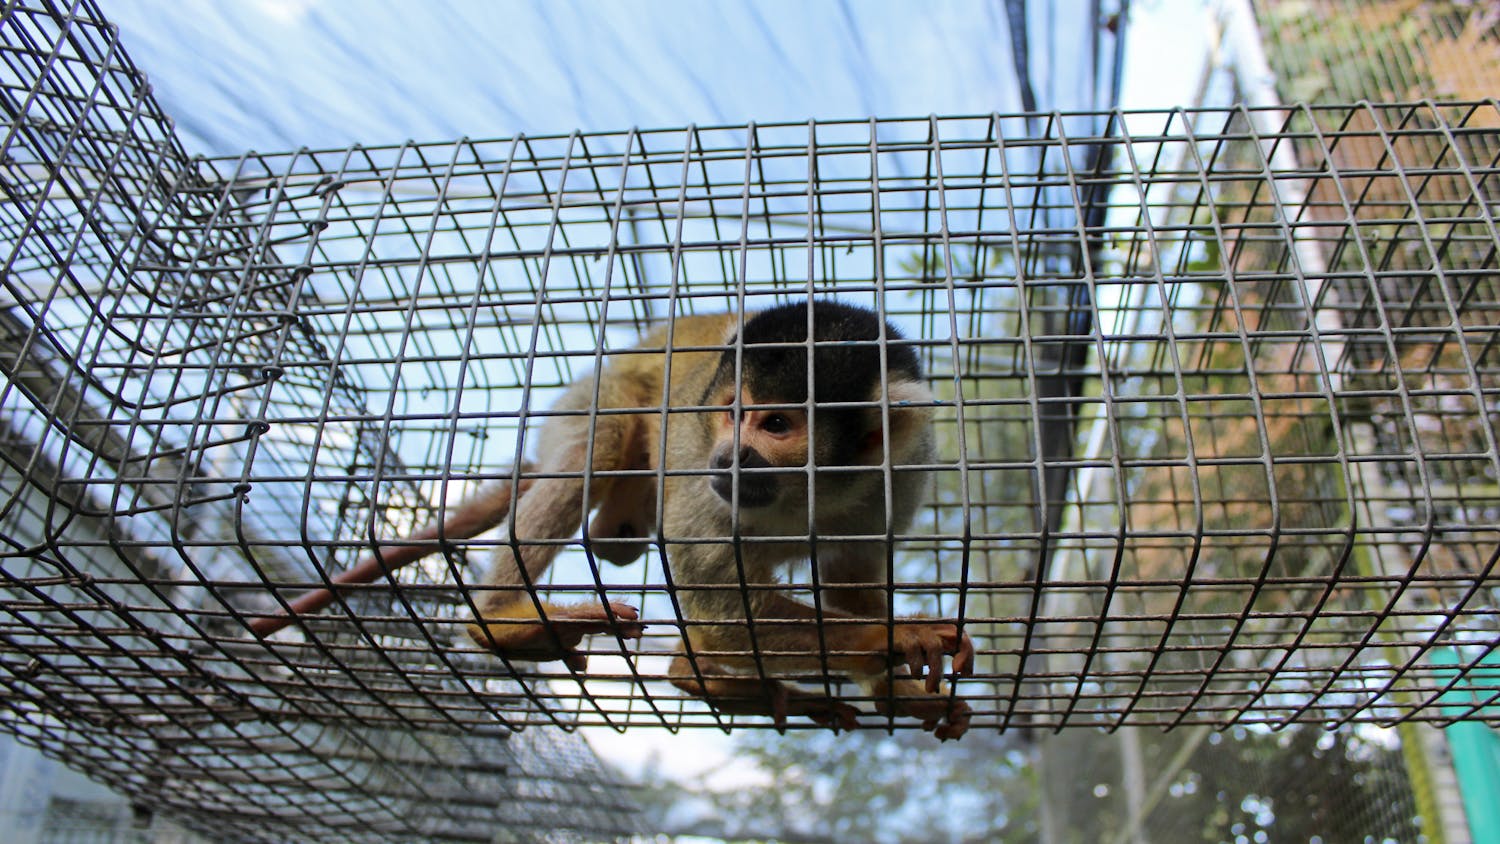 A squirrel monkey walks around its enclosure at the Jungle Friends Primate Sanctuary on Tuesday, Oct. 12, 2021.